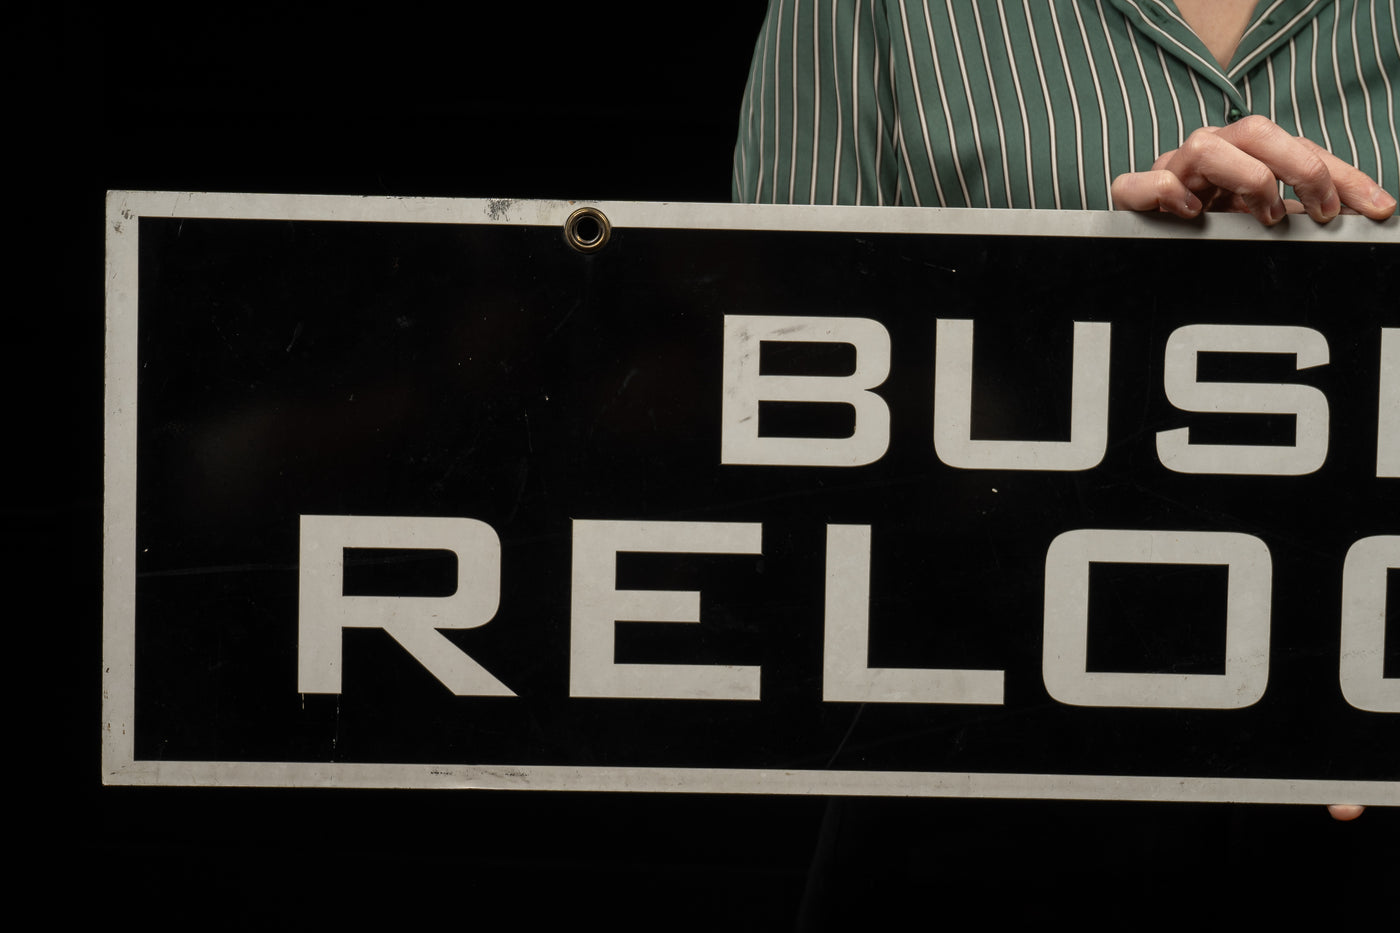 Vintage Double-Sided Business Relocating Sign